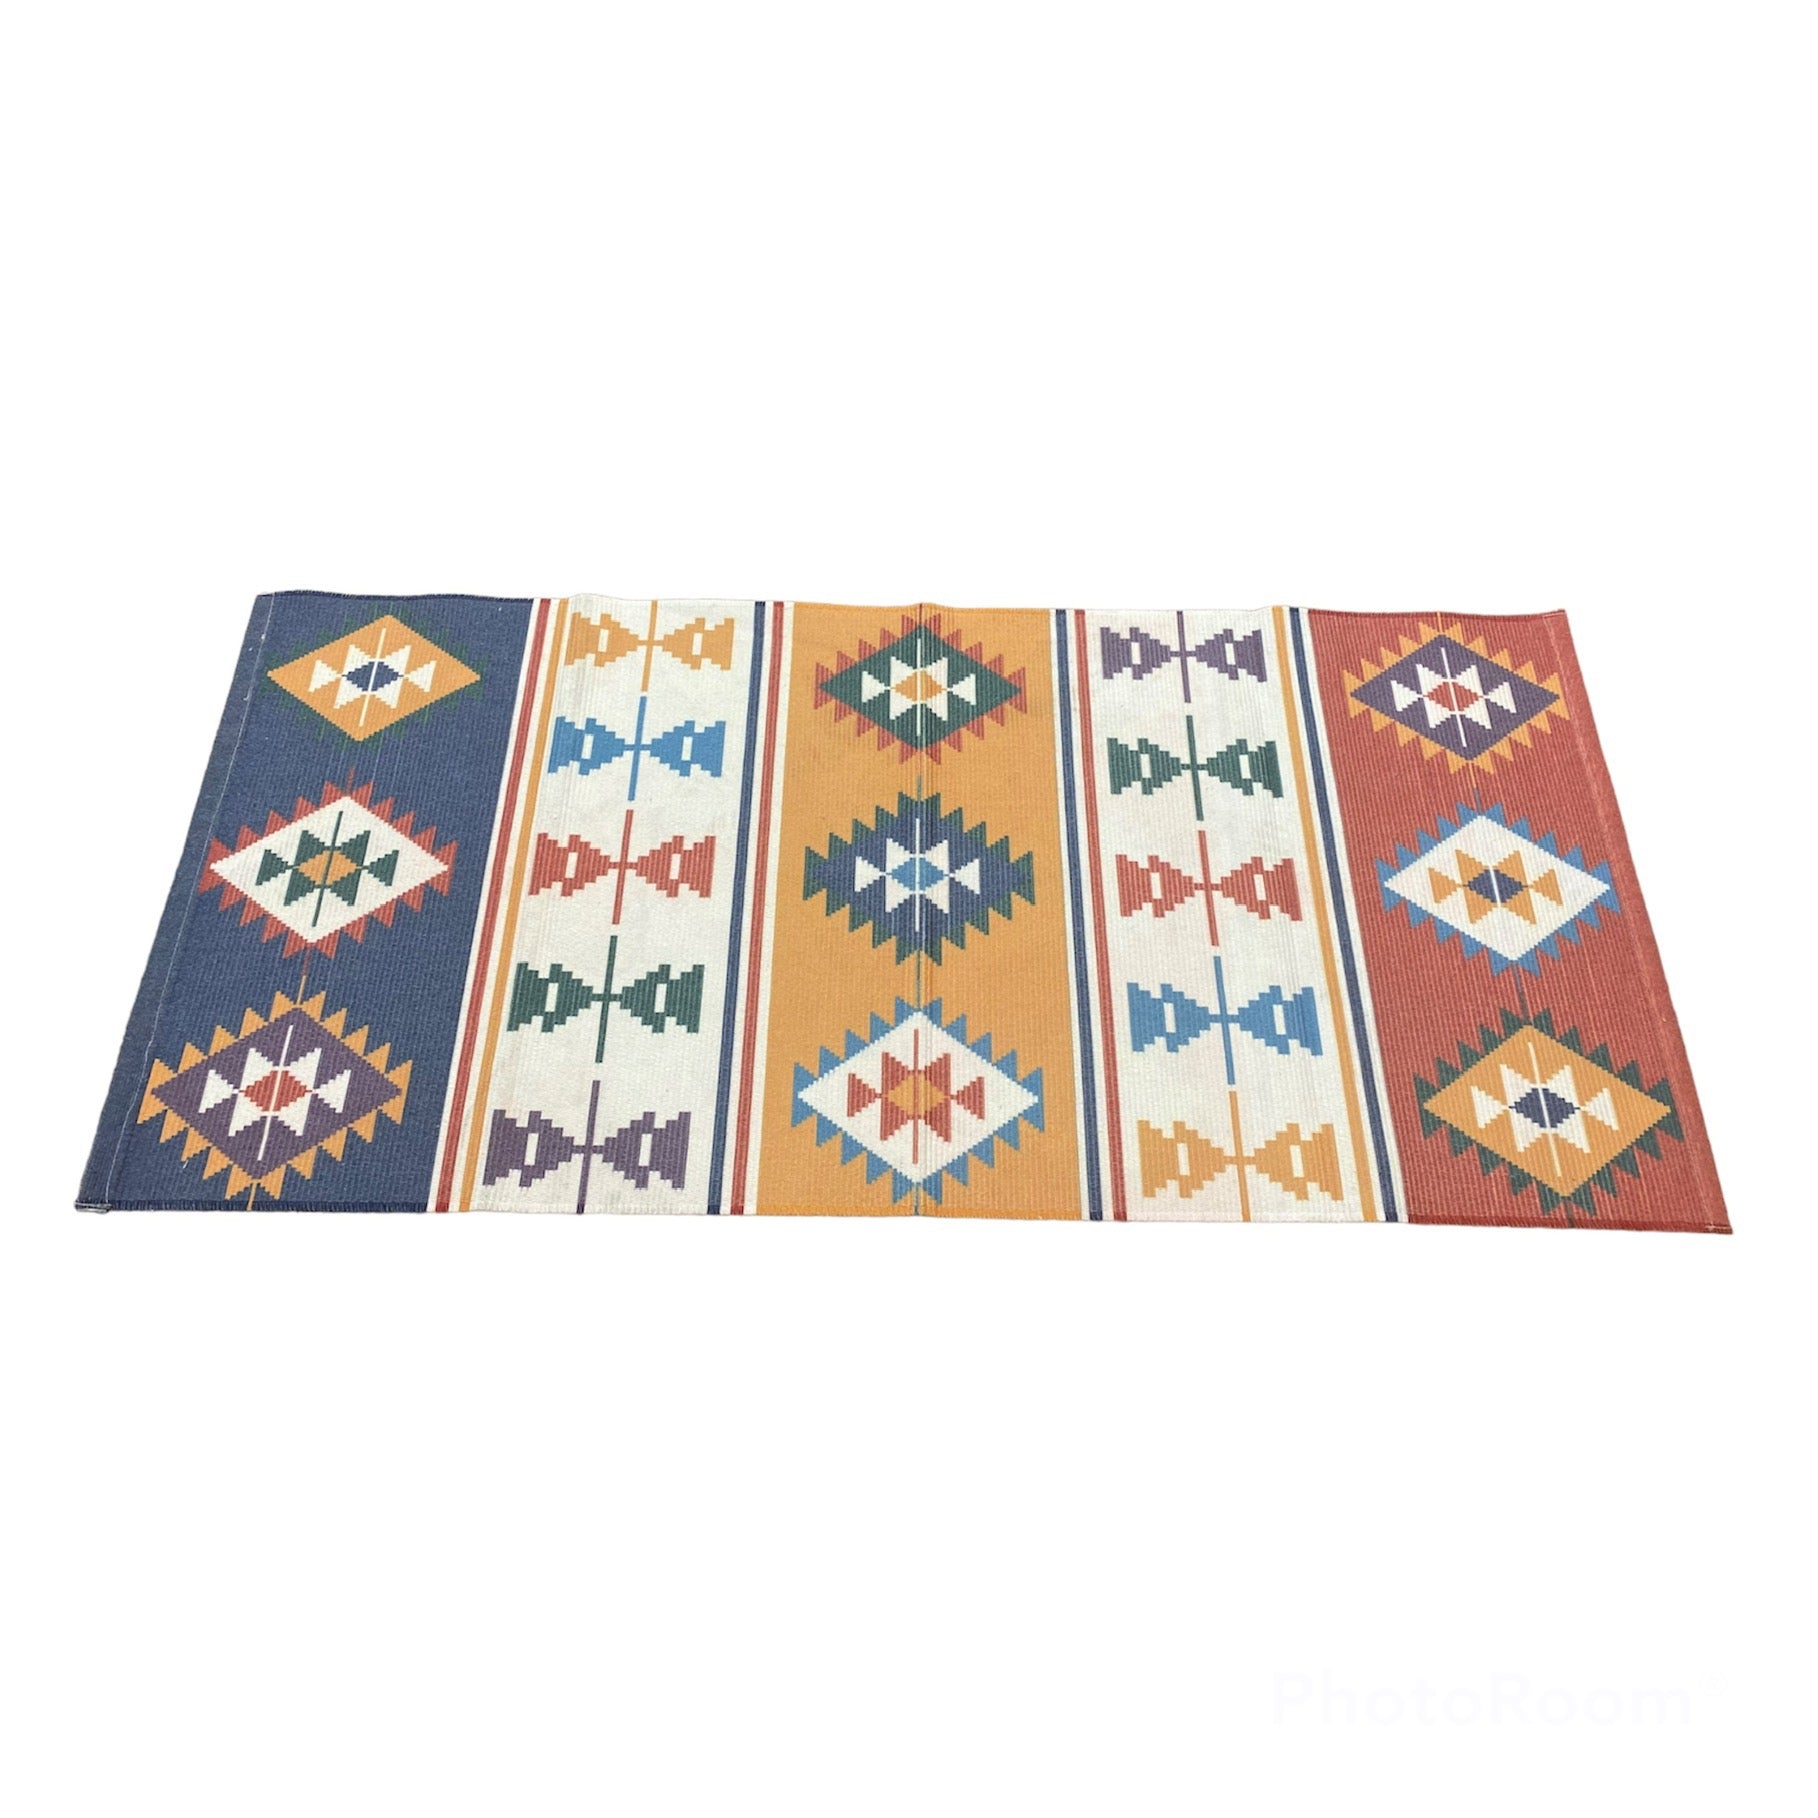 Bedside  Rugs and Carpets for Living Room Cotton Floor Mat Diamond